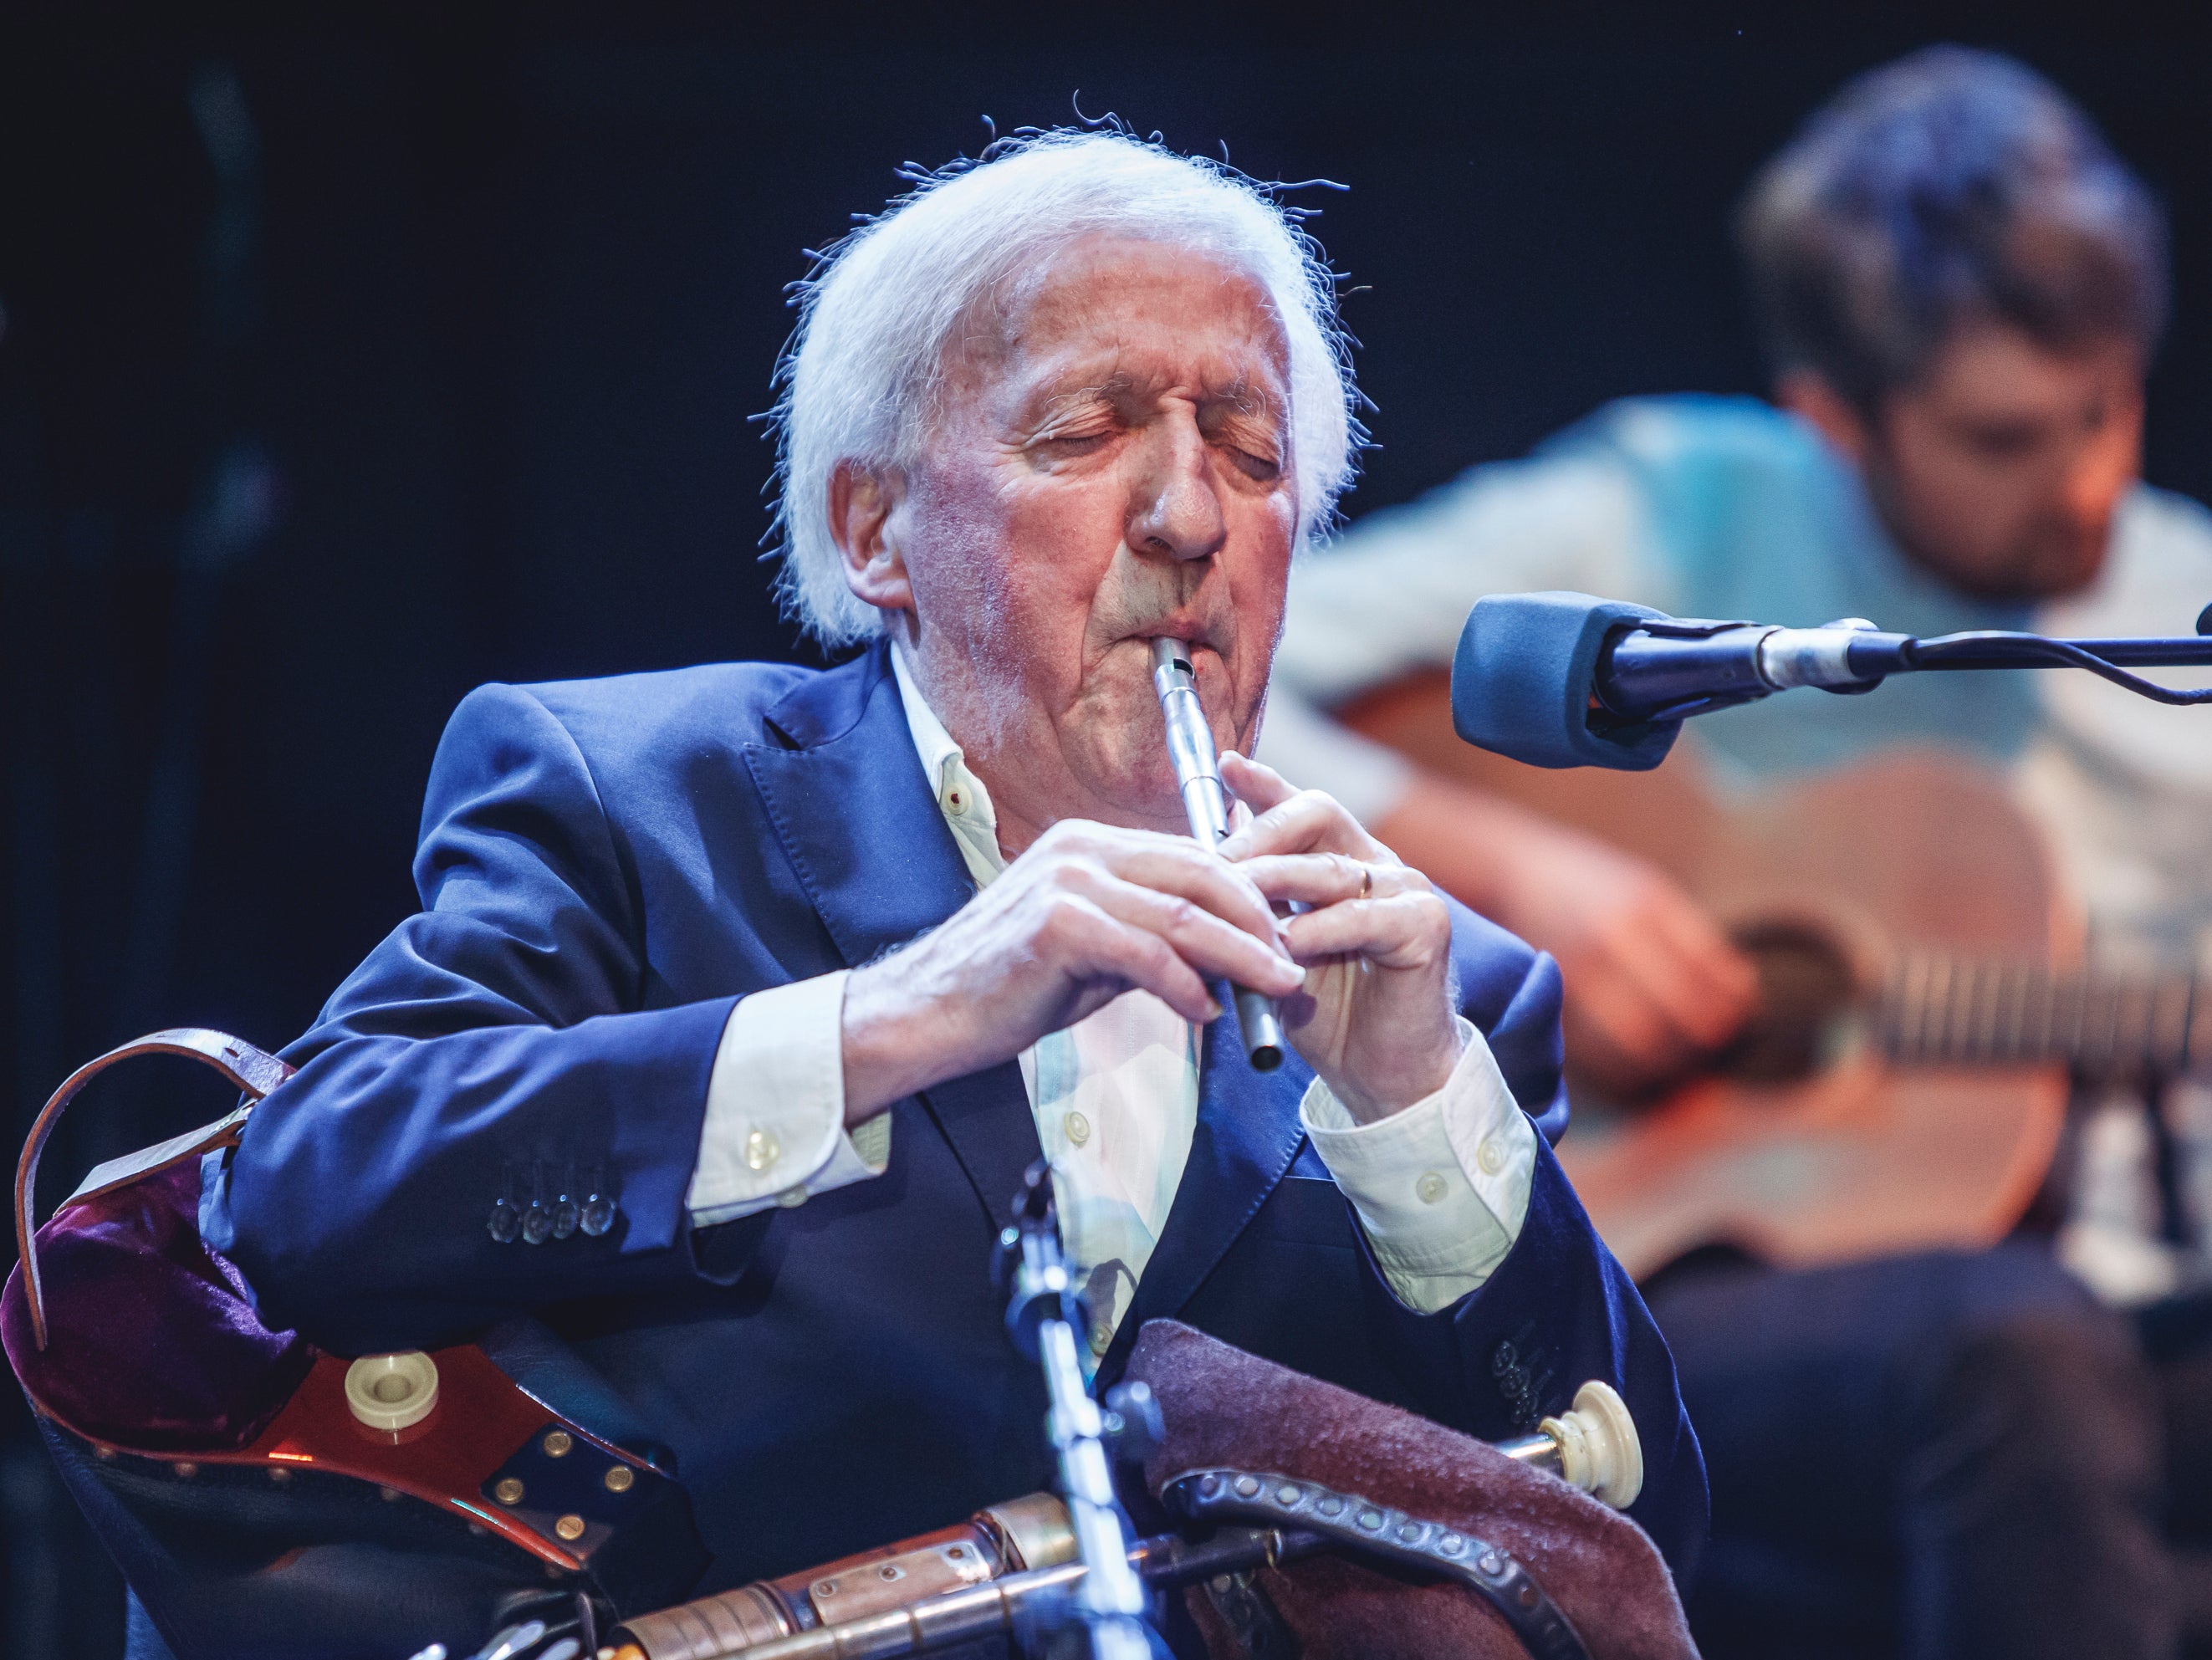 As the lineup shifted over the years, Moloney remained a constant in the band, playing the tin whistle and uilleann pipes